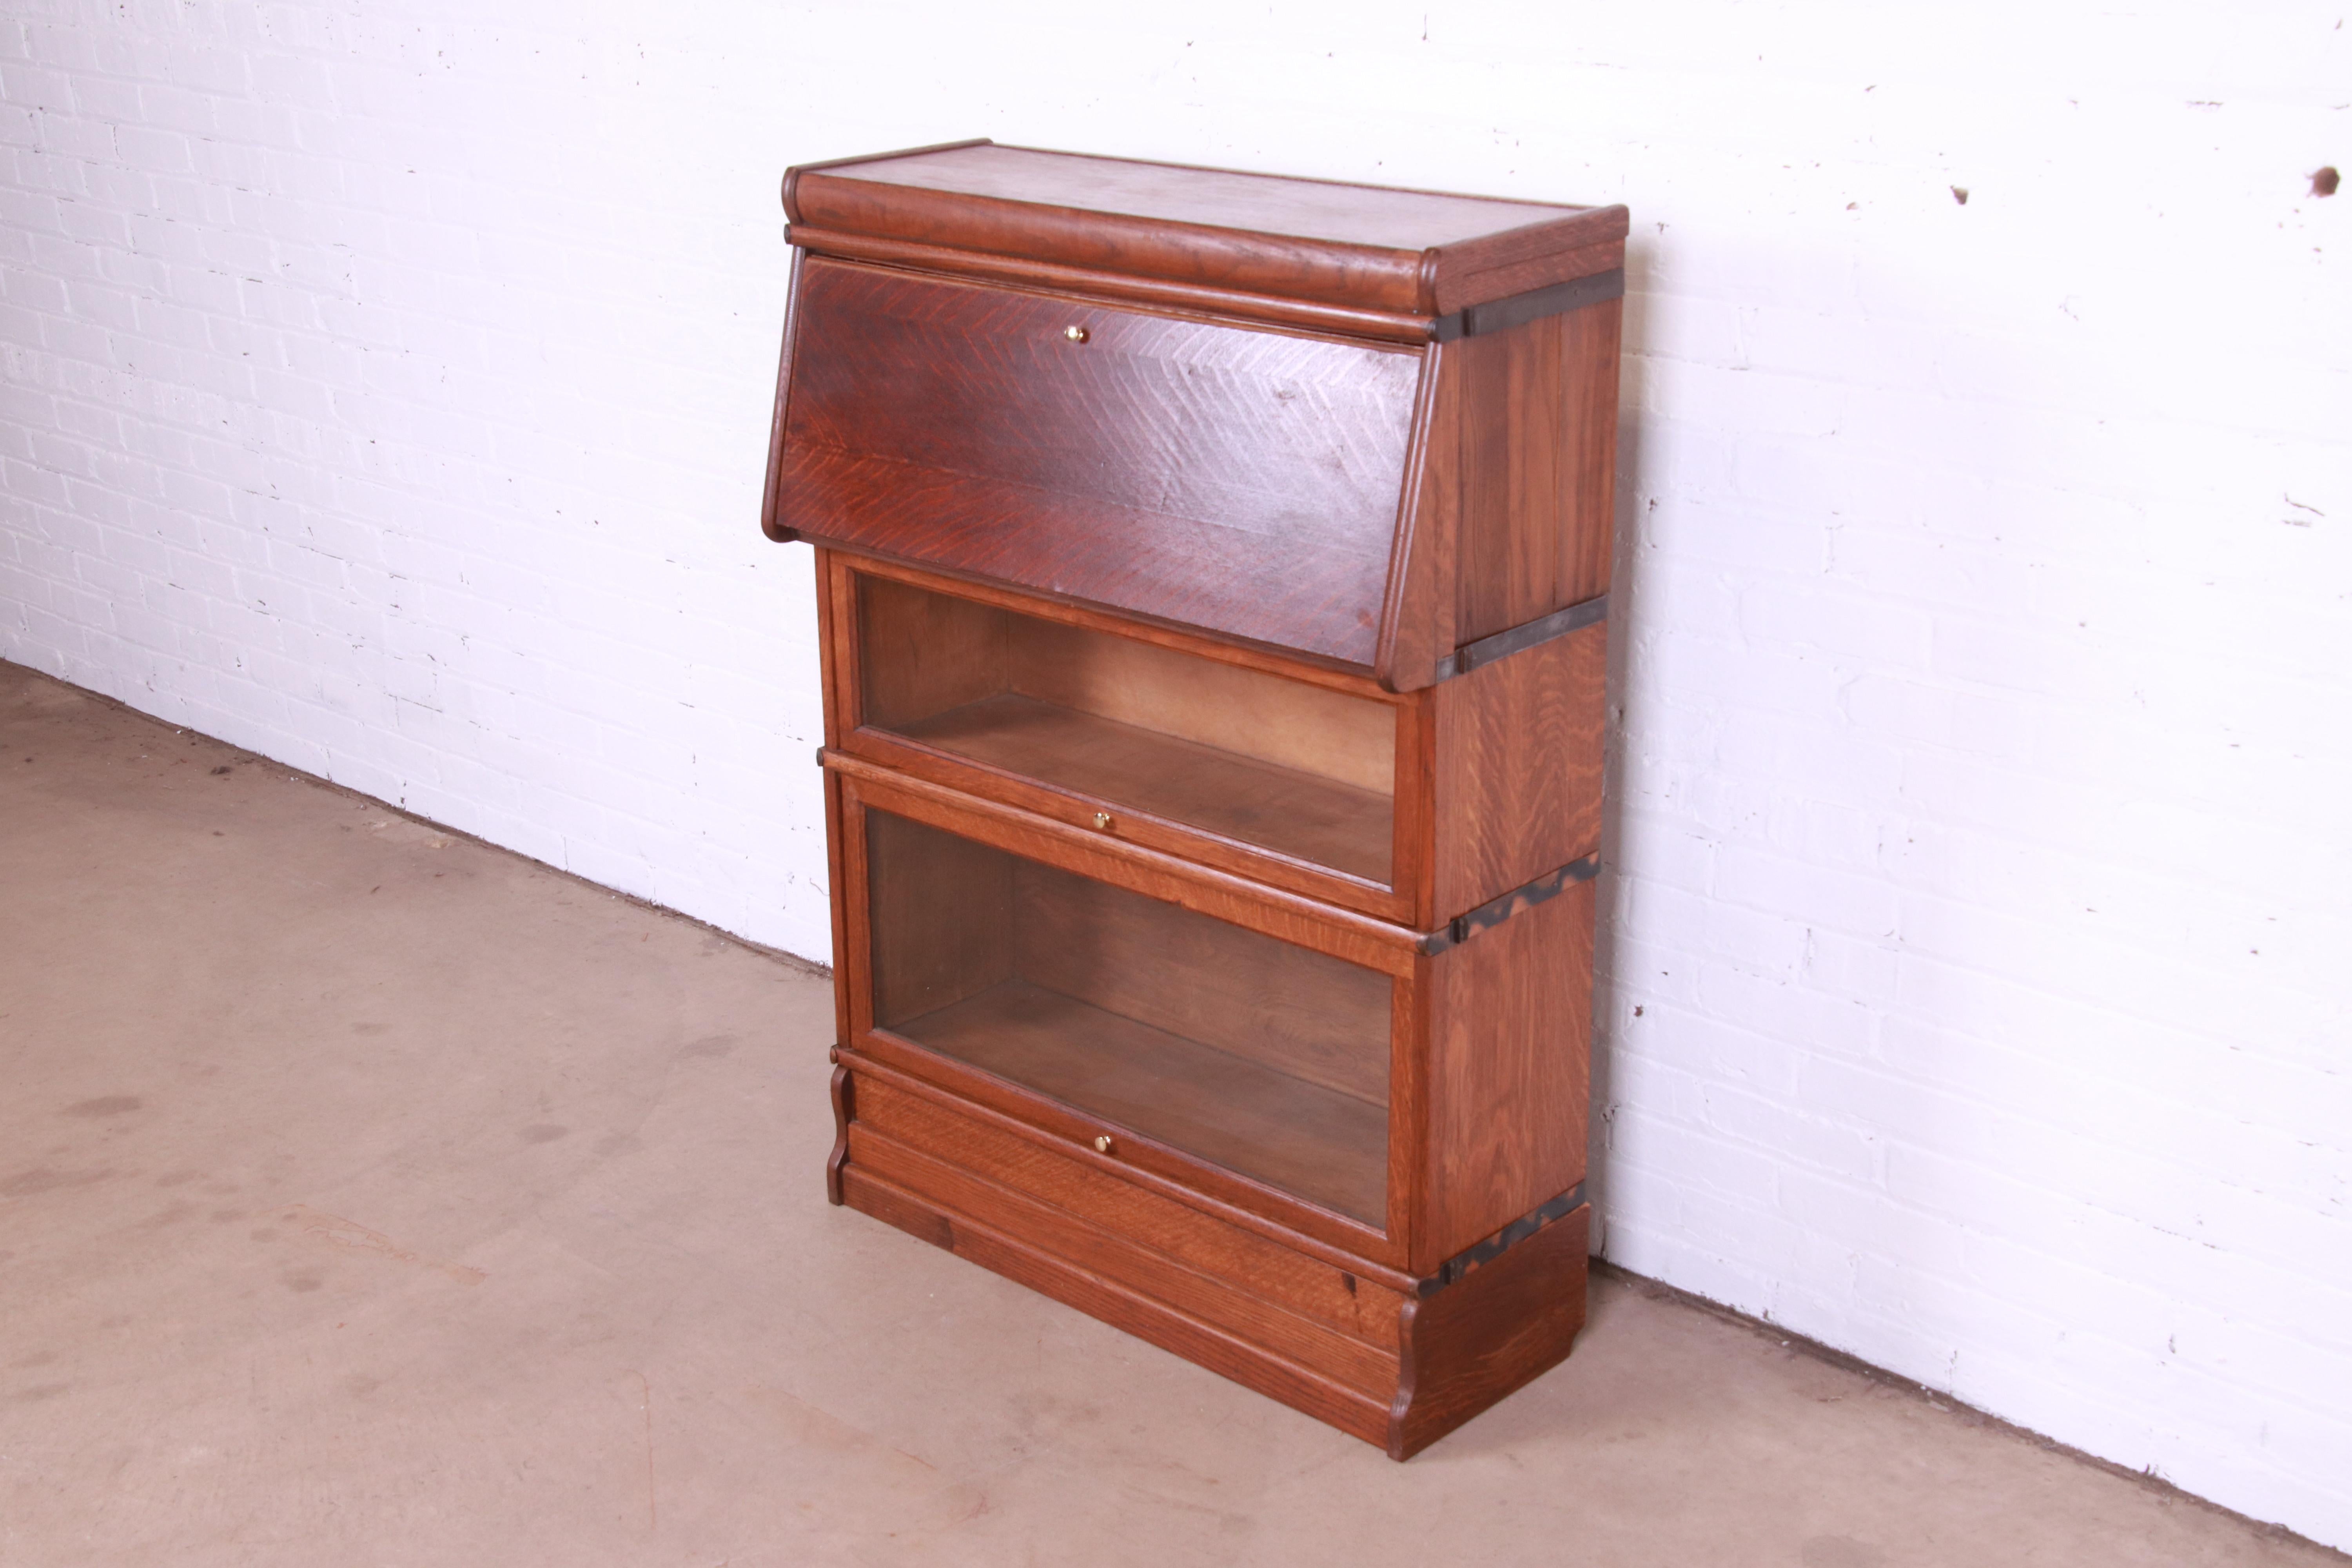 Arts and Crafts Arts & Crafts Oak Barrister Bookcase with Drop Front Secretary Desk, circa 1920s